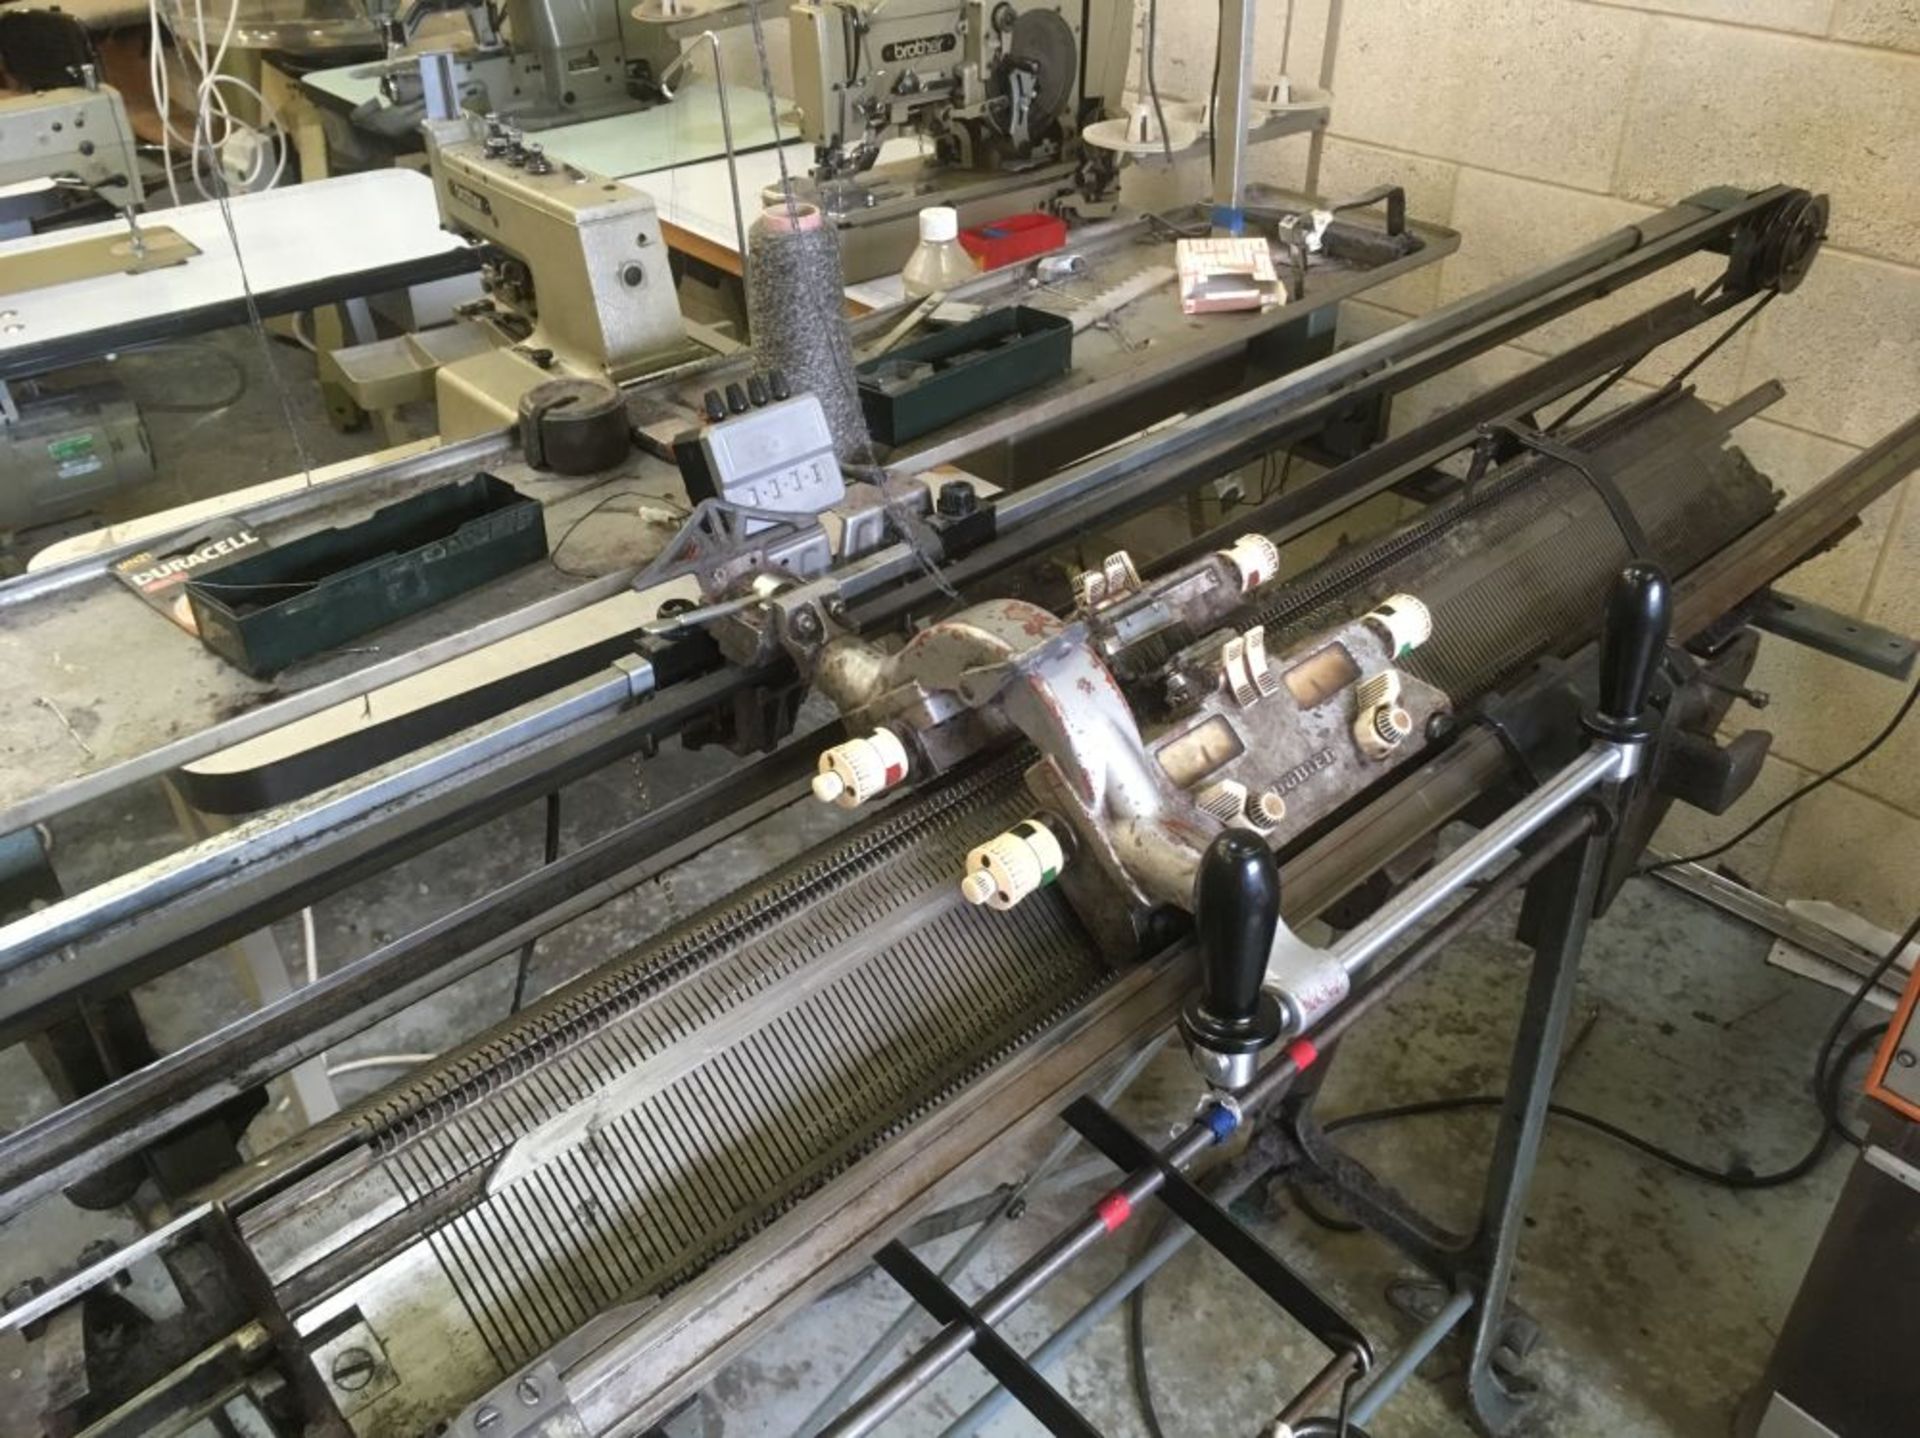 * Dubied 1 metre Manual/Motorised Knitting Machine. The goods are located at Unit 11 Poplar Road